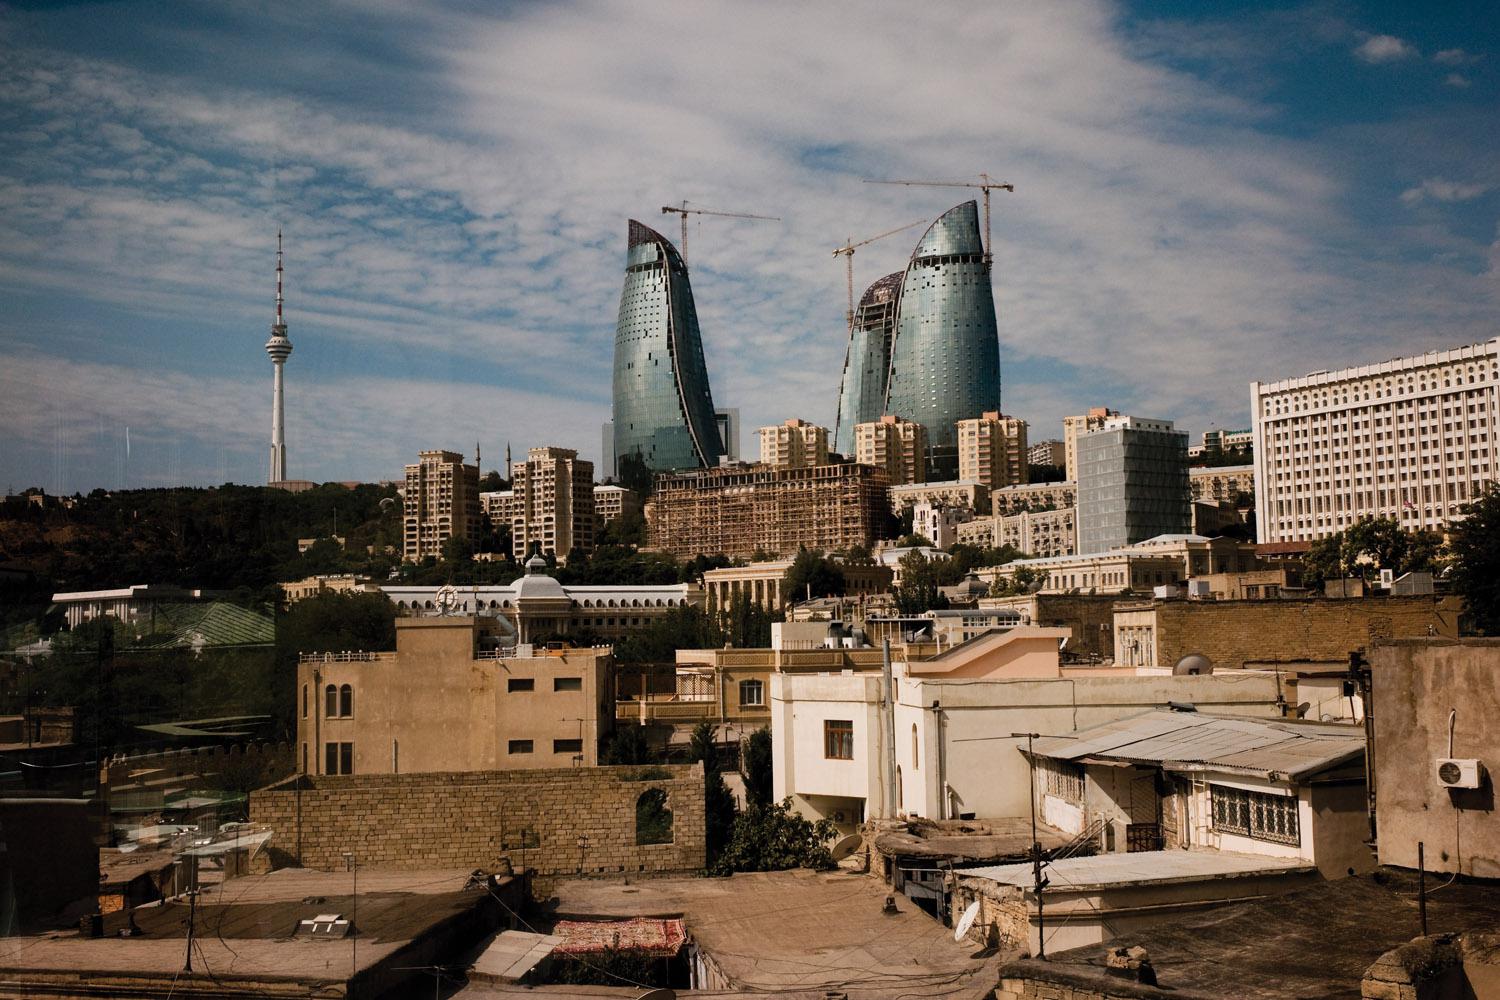 The Flame Towers are emblematic of new construction in Baku.